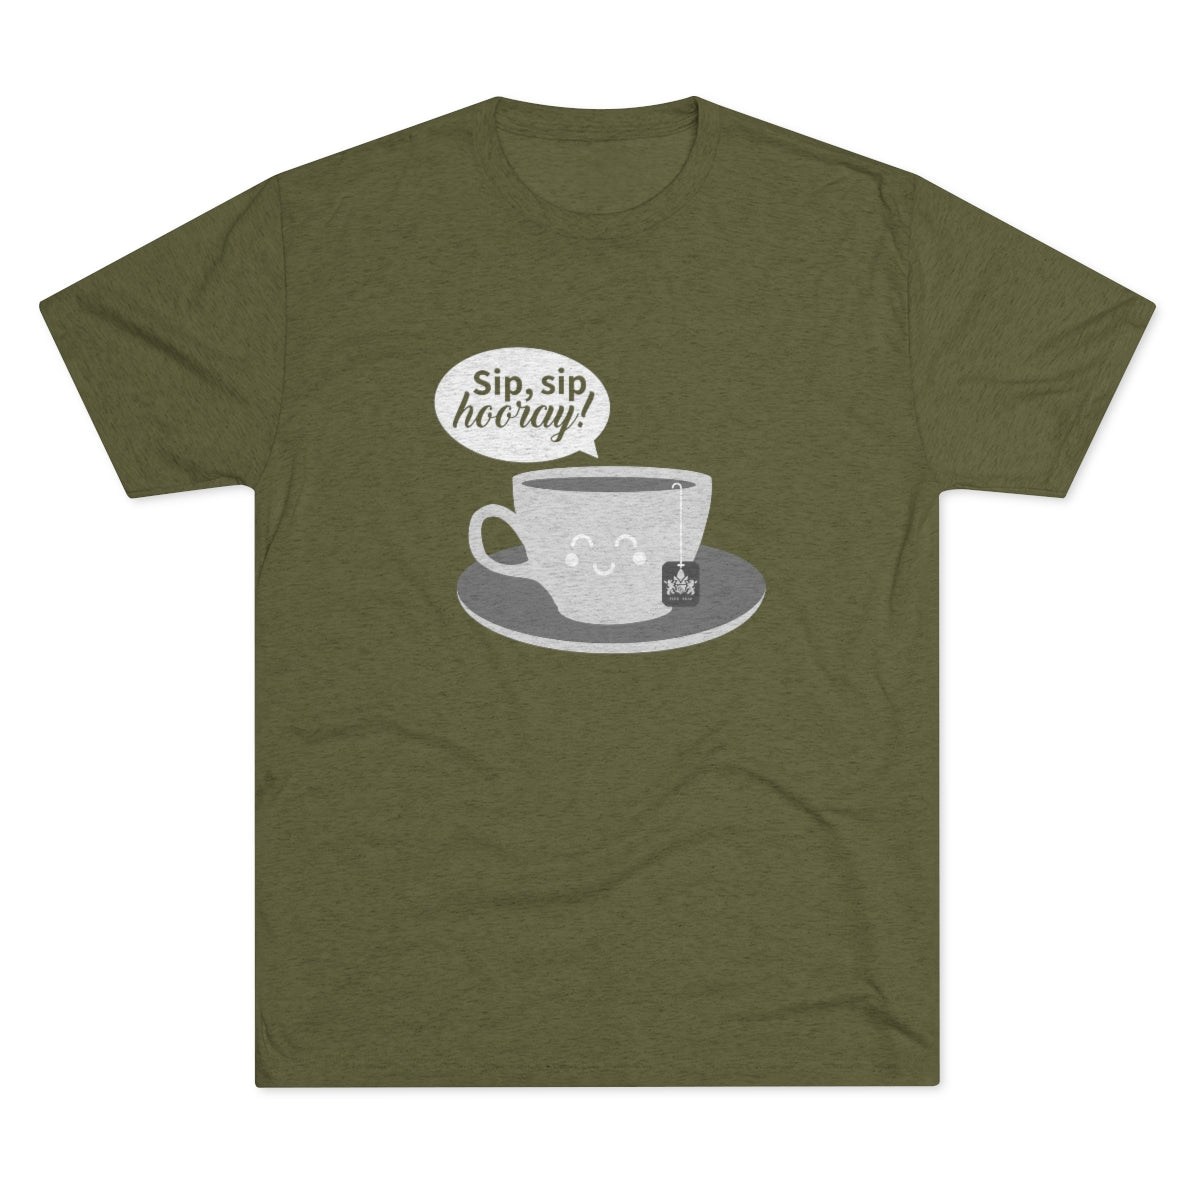 Sip, Sip Hooray Graphic Tee - Tri-Blend Military Green S - Harney & Sons Fine Teas